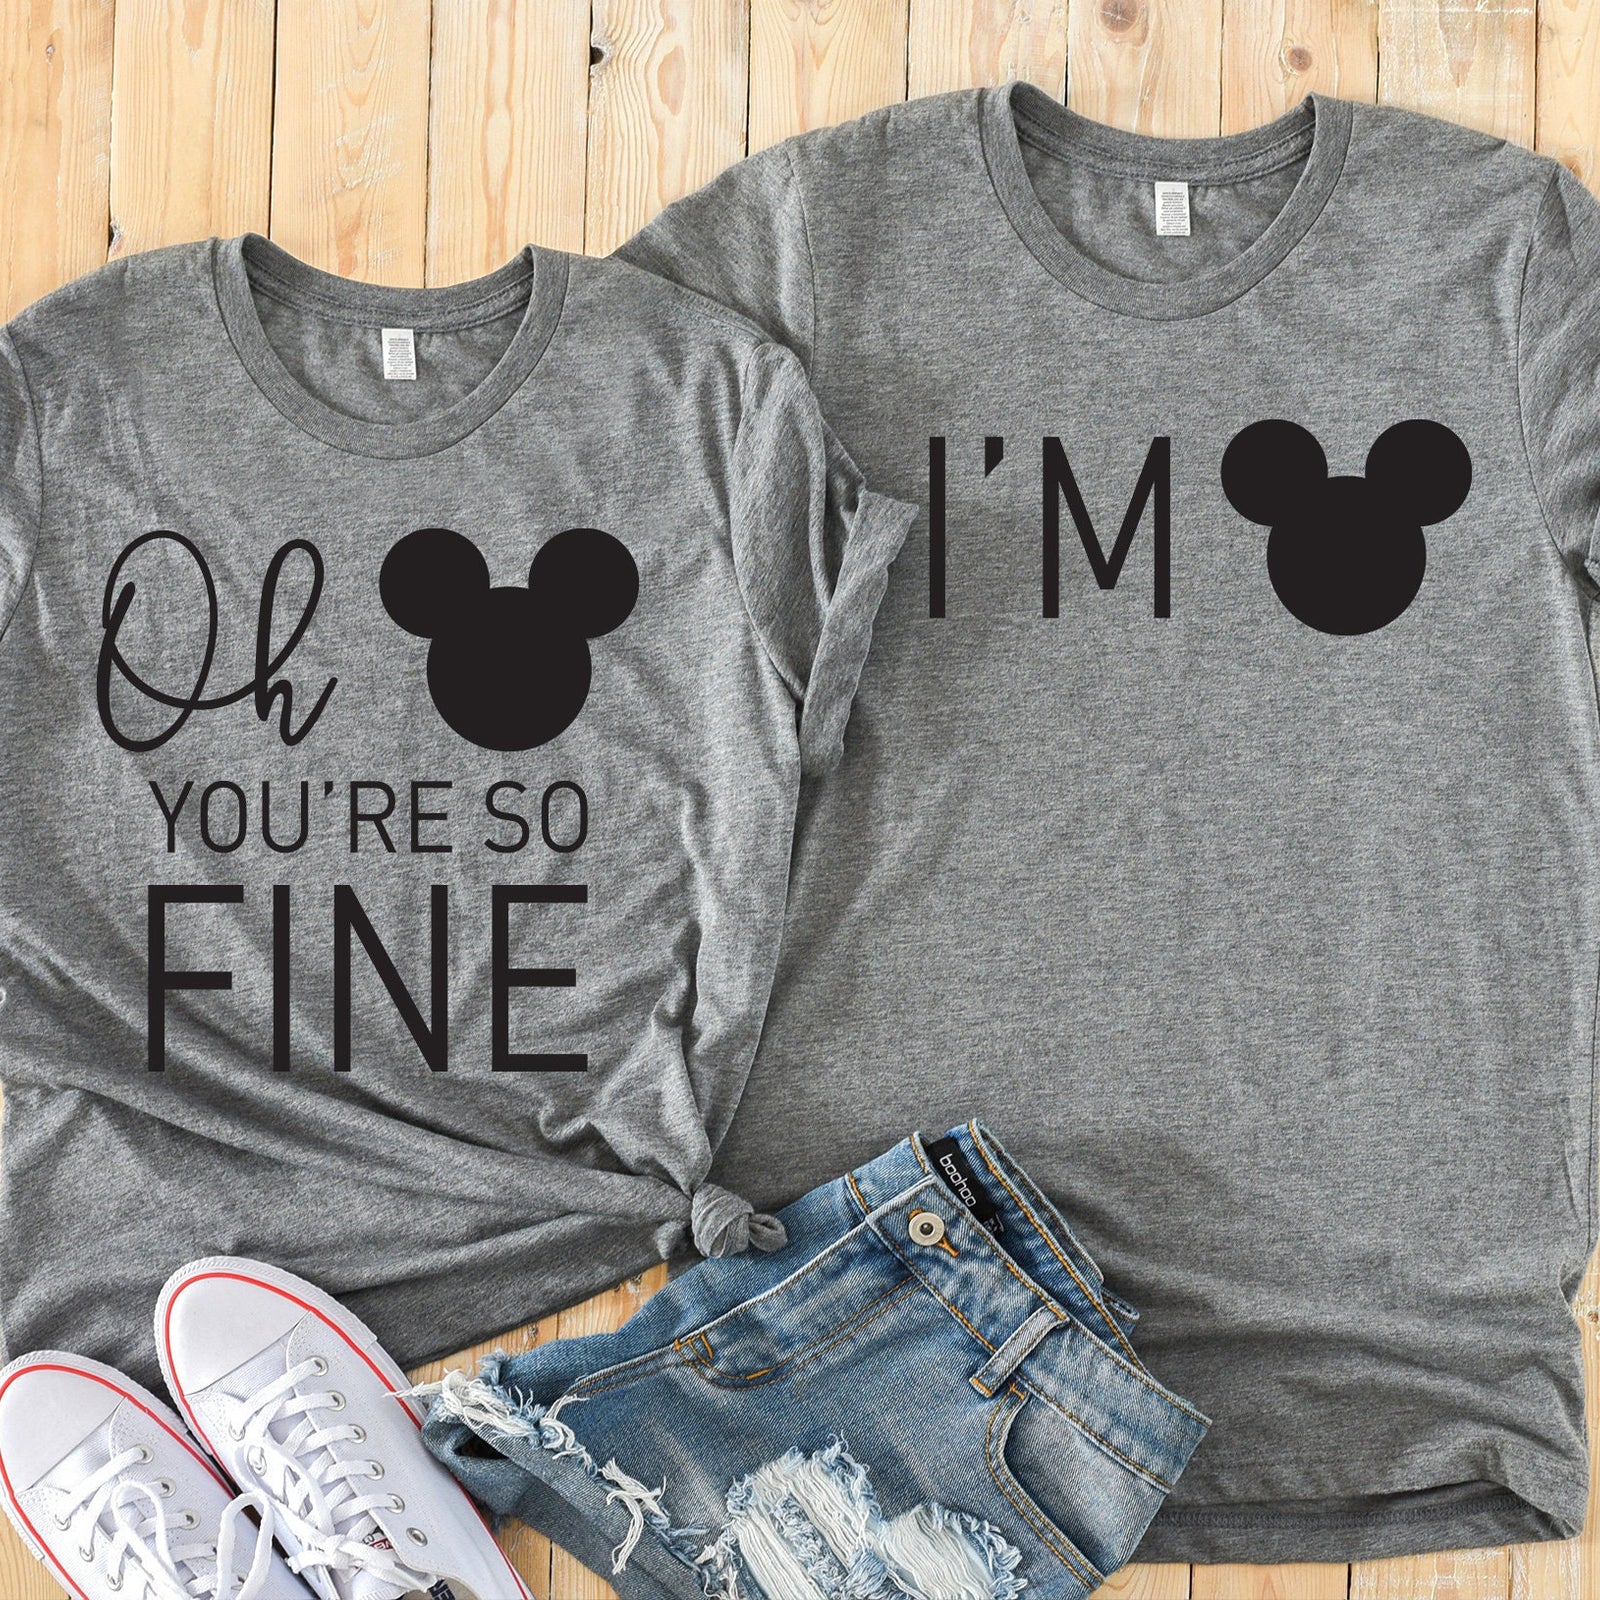 Oh Mickey You're So Fine and I'm Mickey Disney Couples Matching T Shirts - Mickey and Minnie Mouse Adult Shirts - Custom Colors